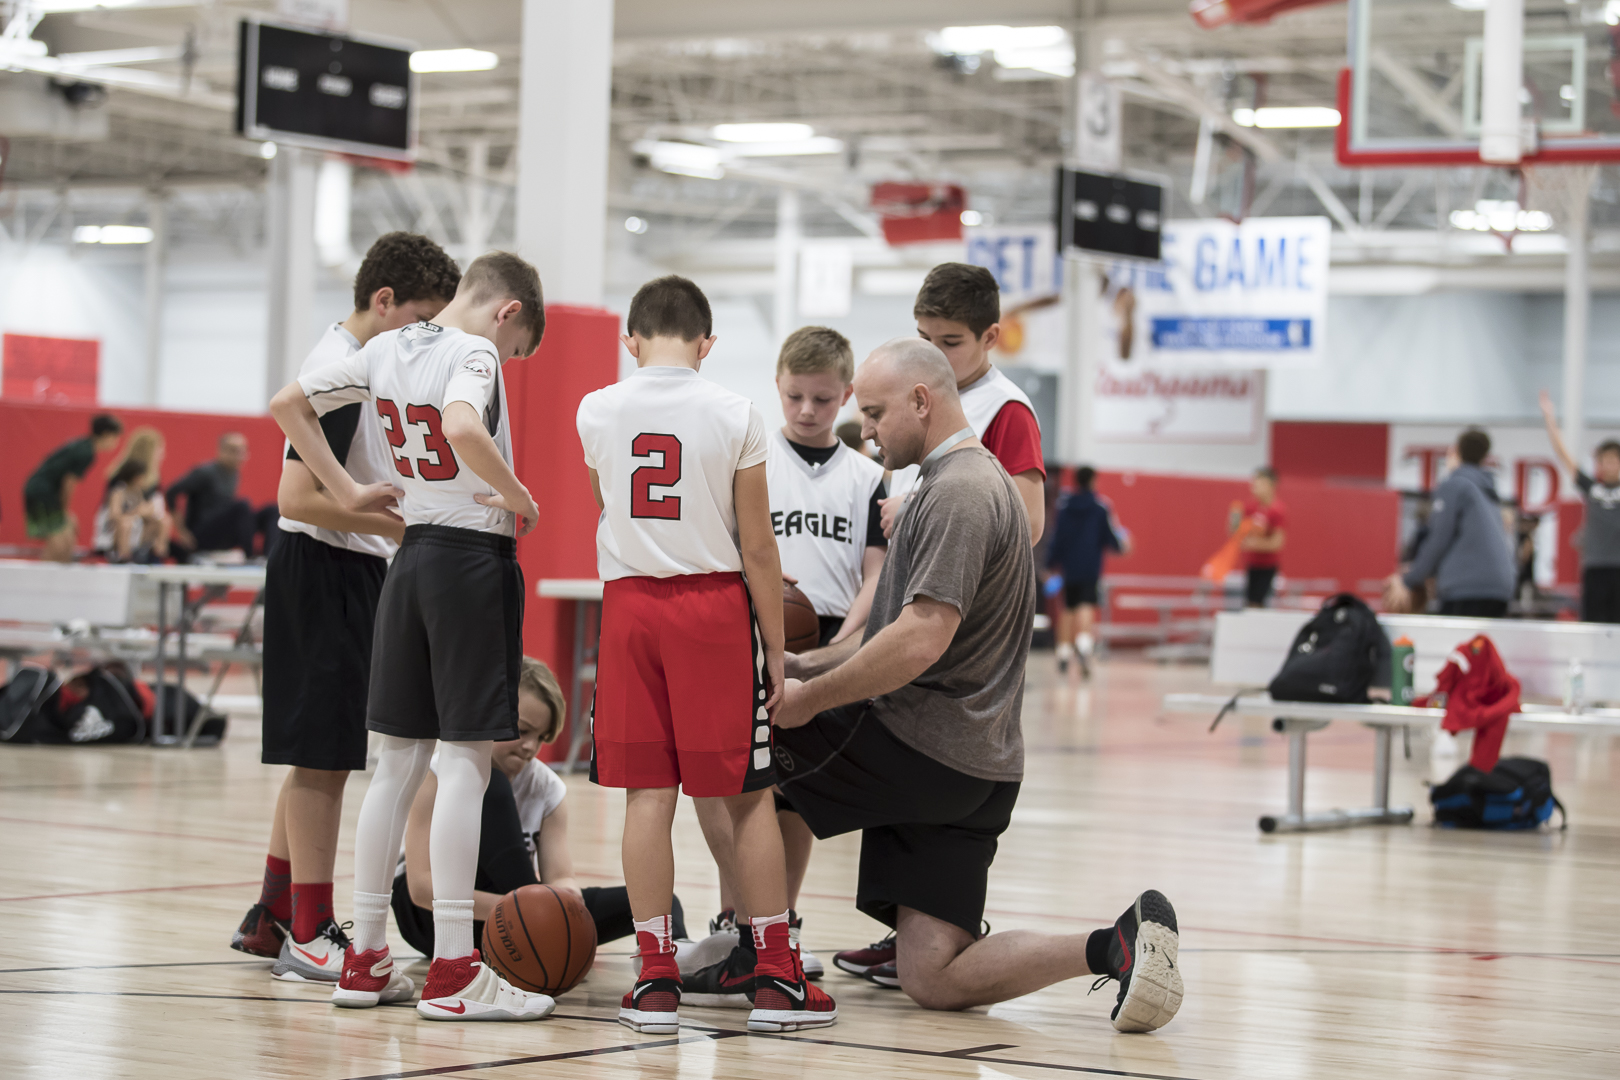 Fieldhouse USA’s Quiet Campaign for MVP (Most Valuable Partnership) Photo